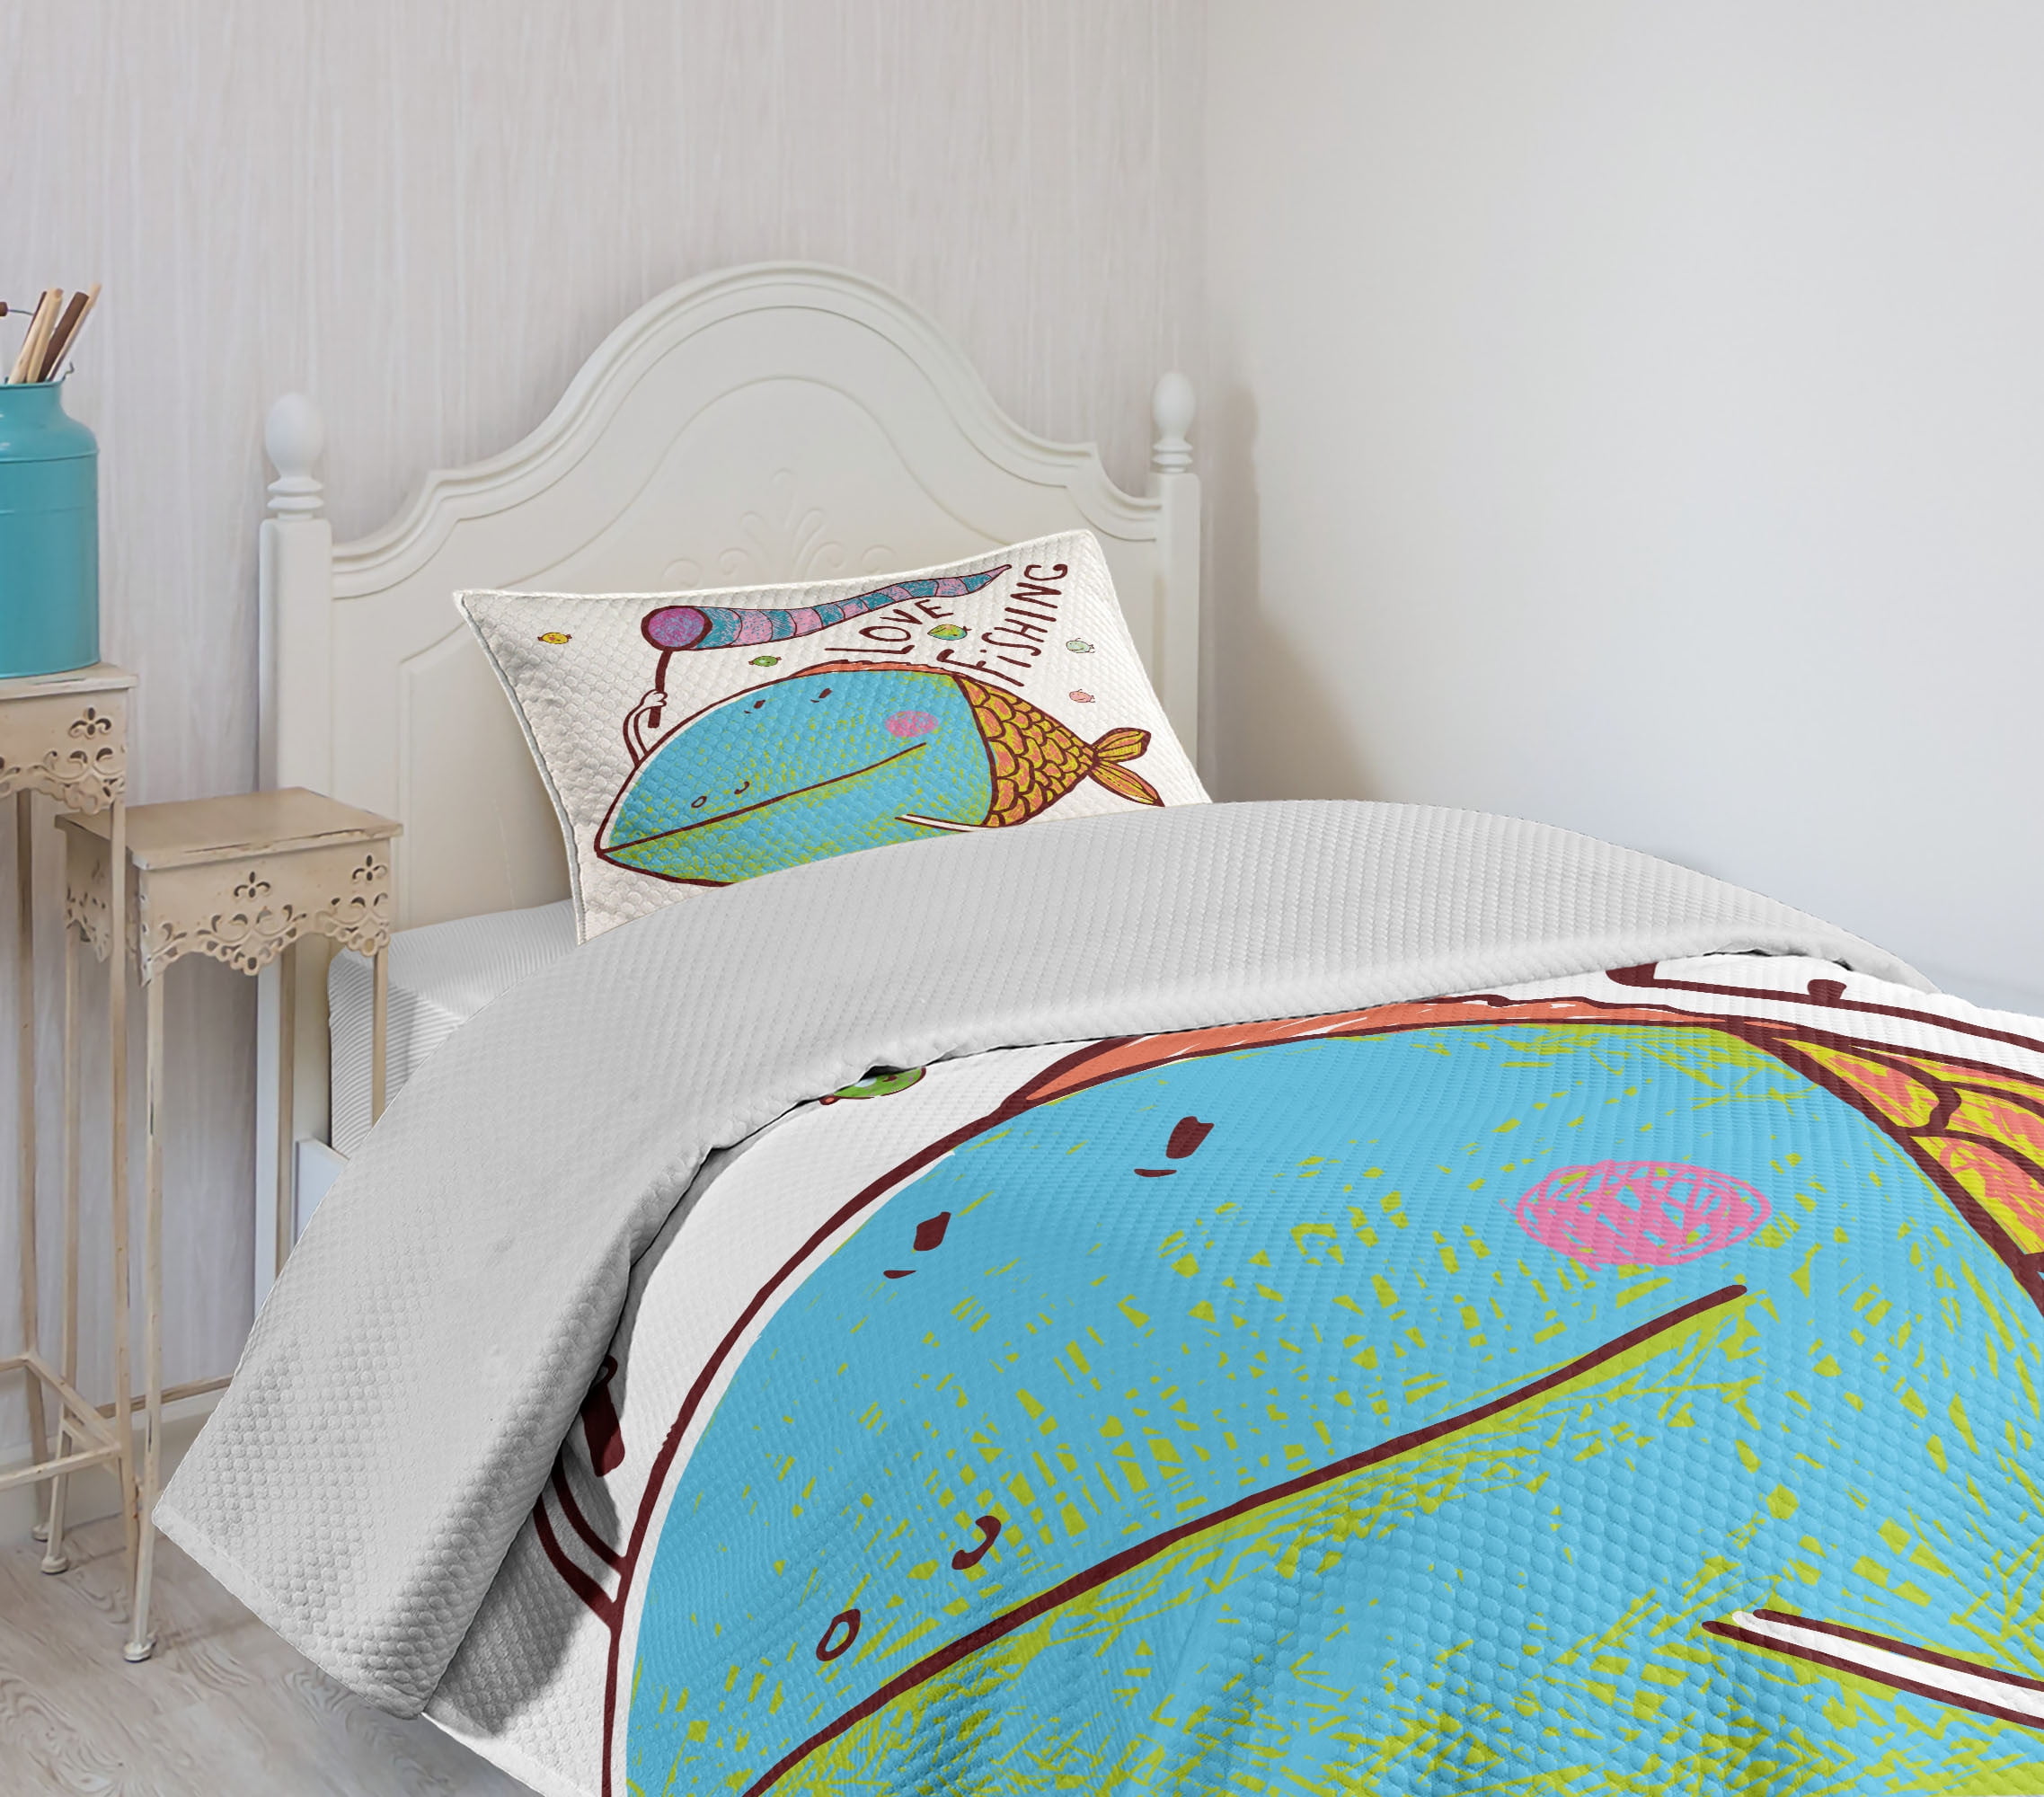 Fishing Bedspread Set Queen Size, Kids Cute Large Fat Fish Holding